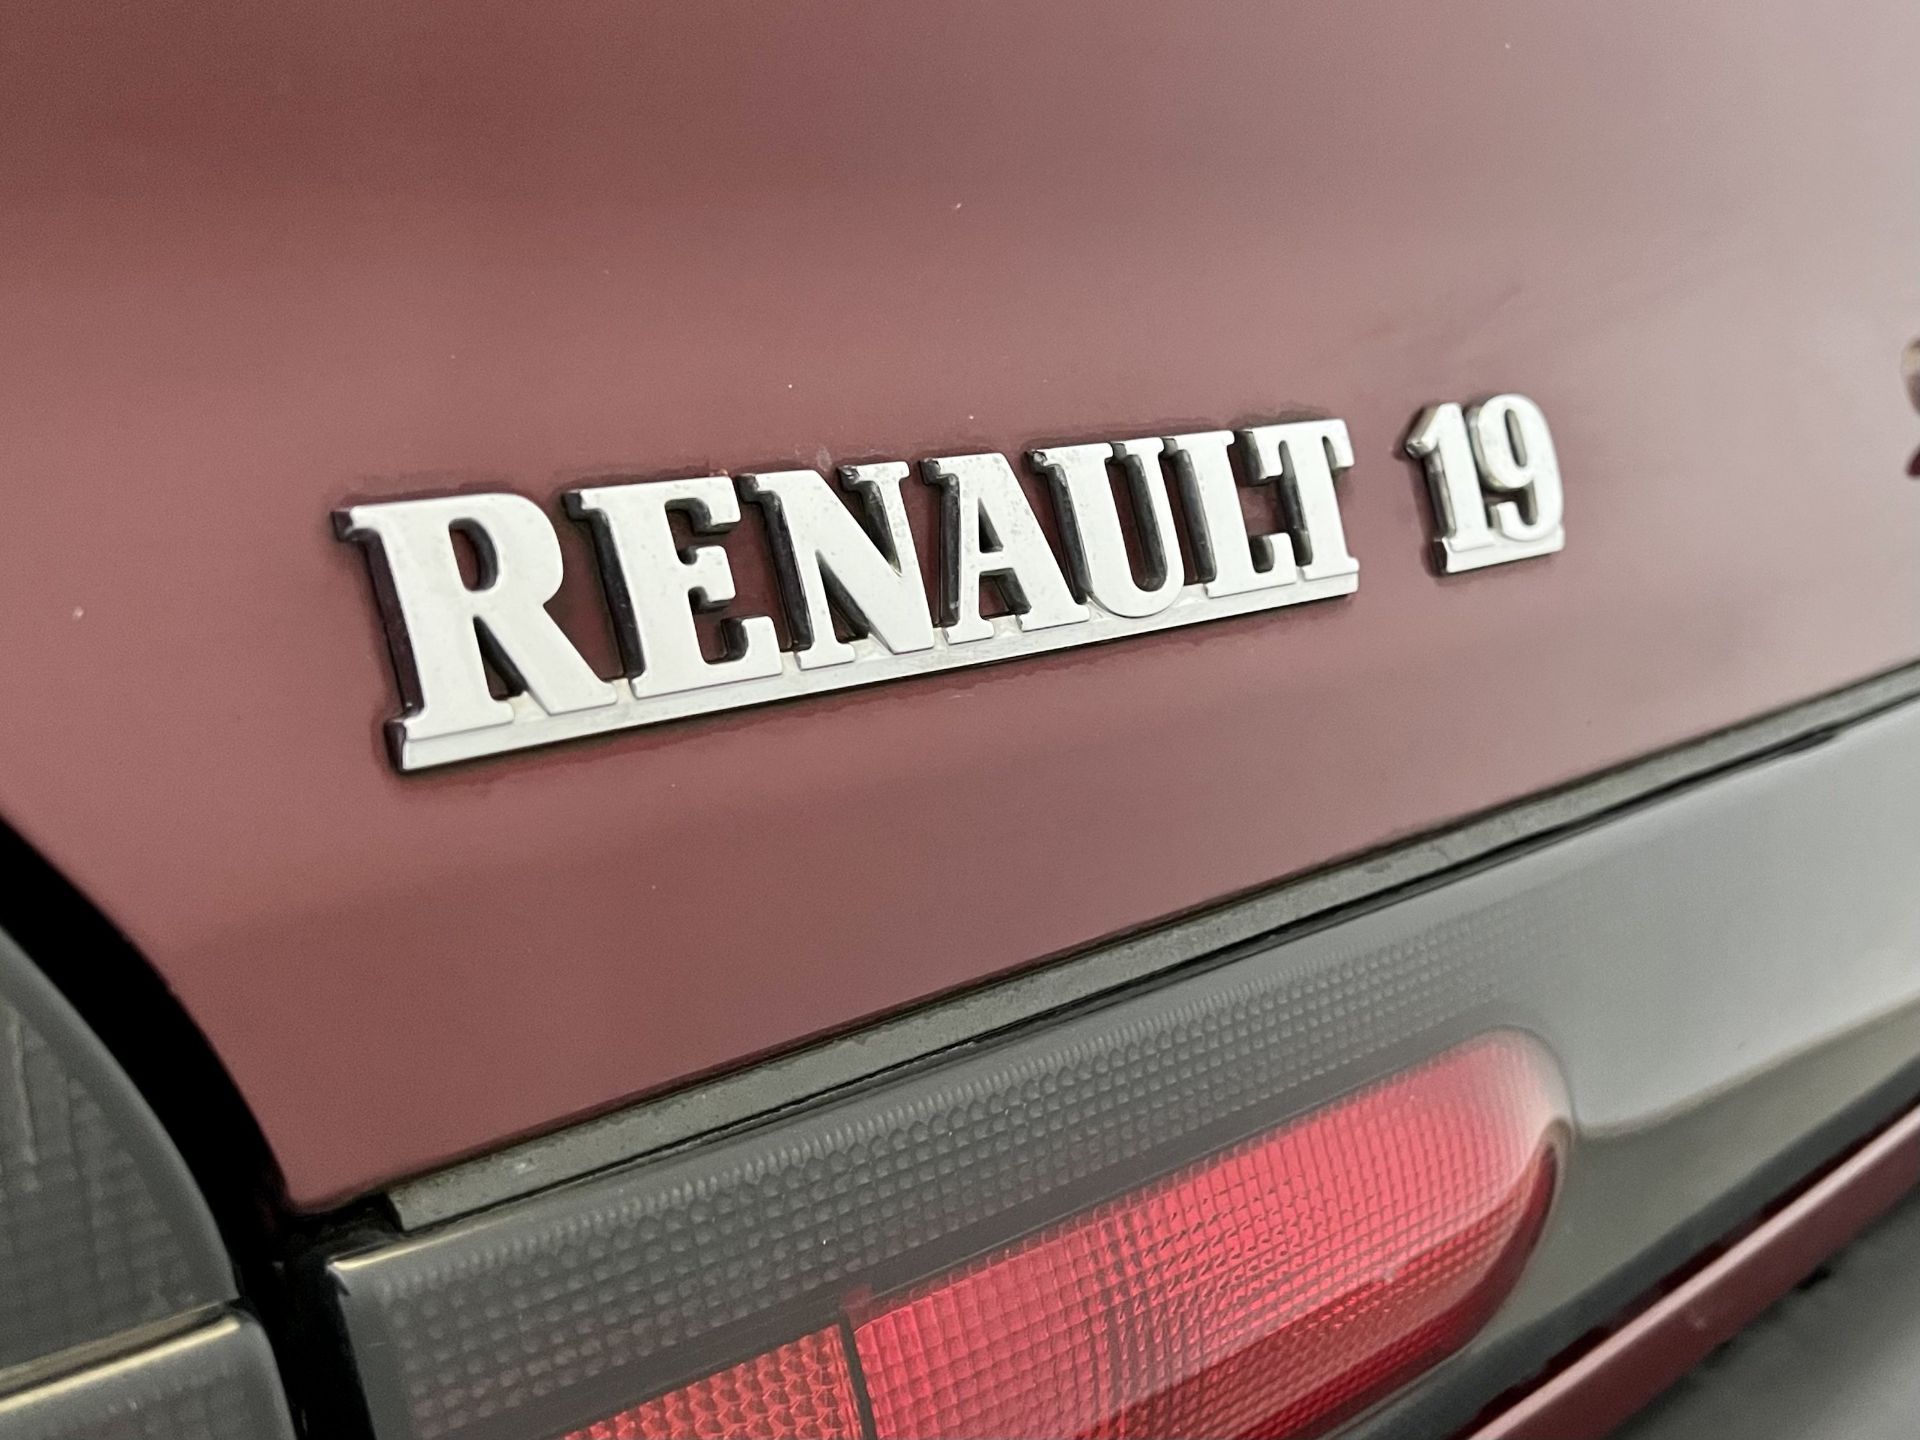 Renault 19 - Image 15 of 38